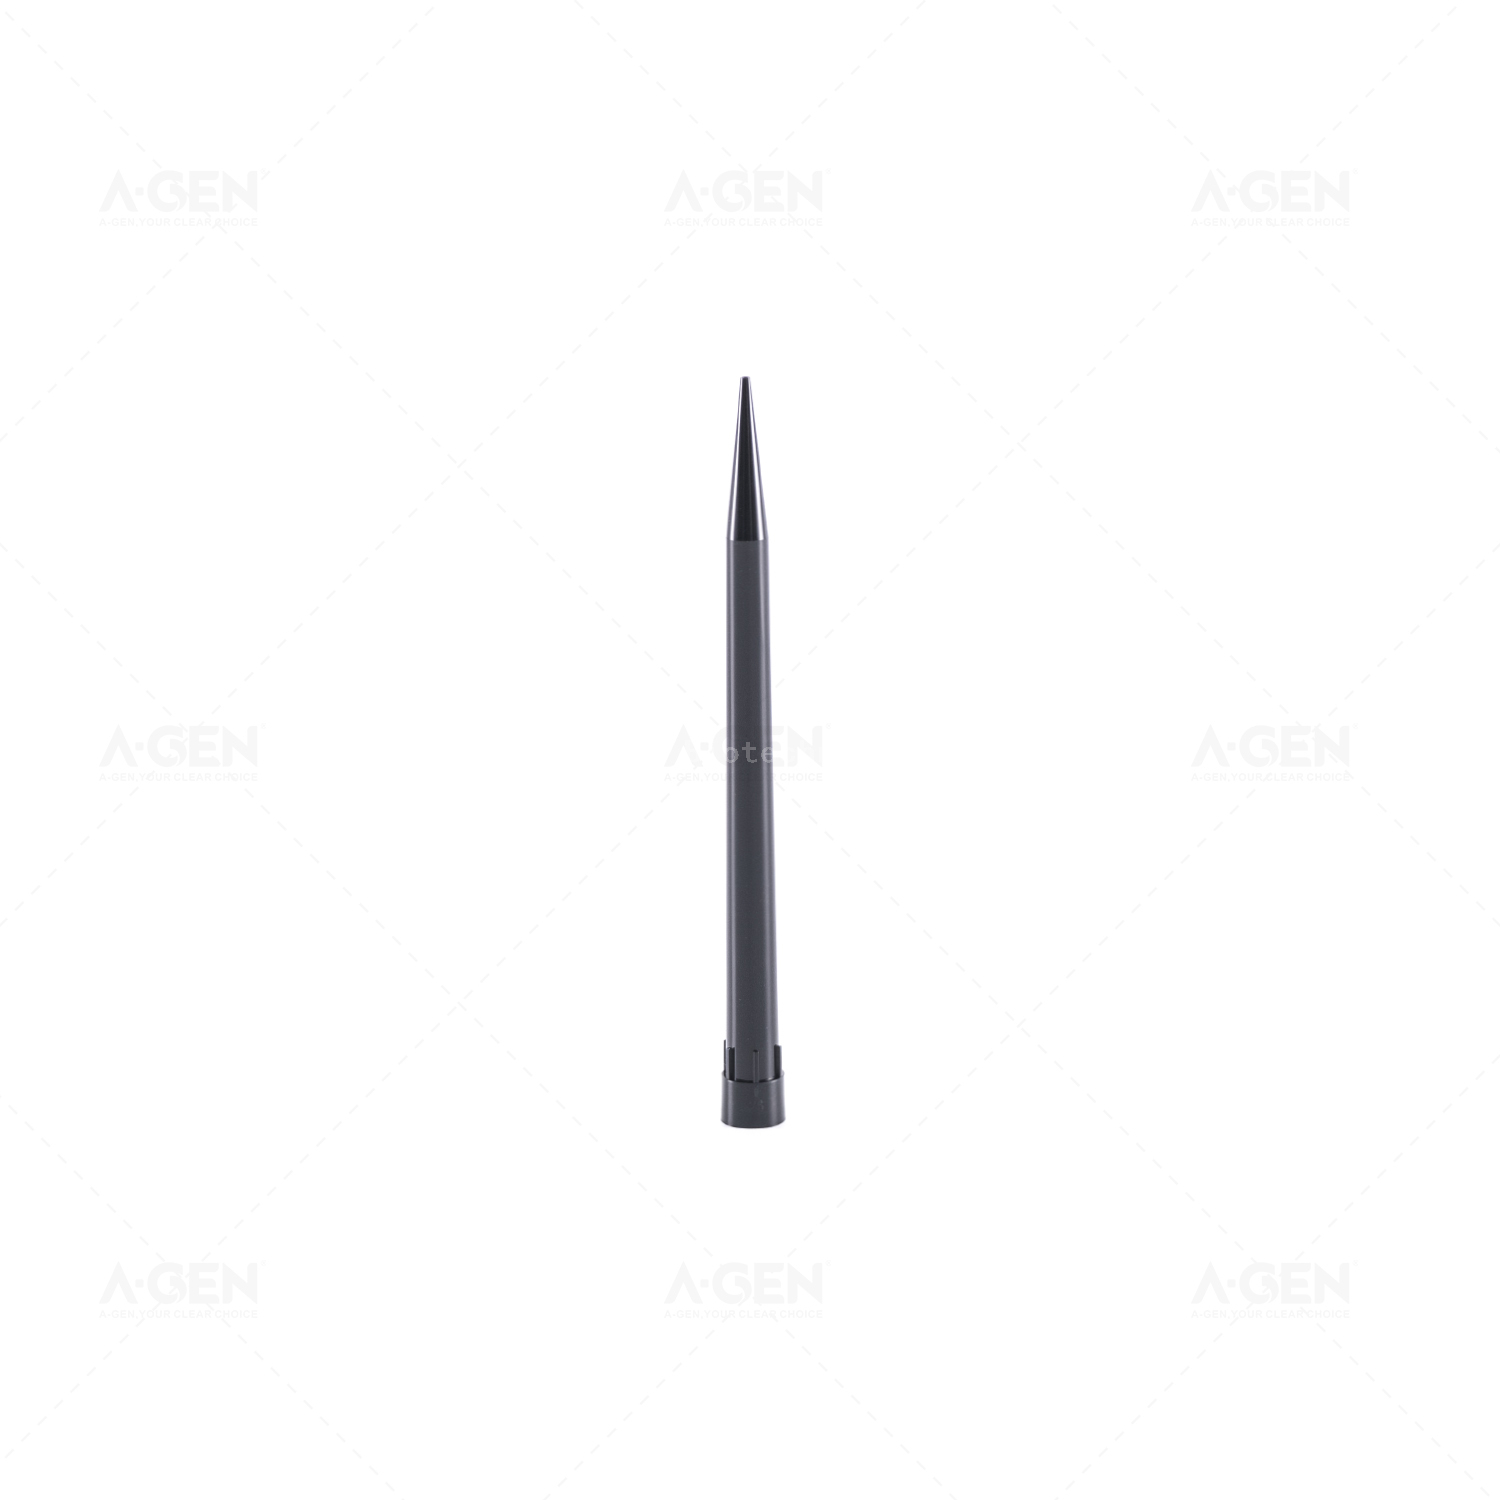 Low Retention 5 Combined Boxes Sterile Hamilton Pipette Tip Conductive 1000μL Black PP Pipette Tip for Liquid Transfer Without Filter